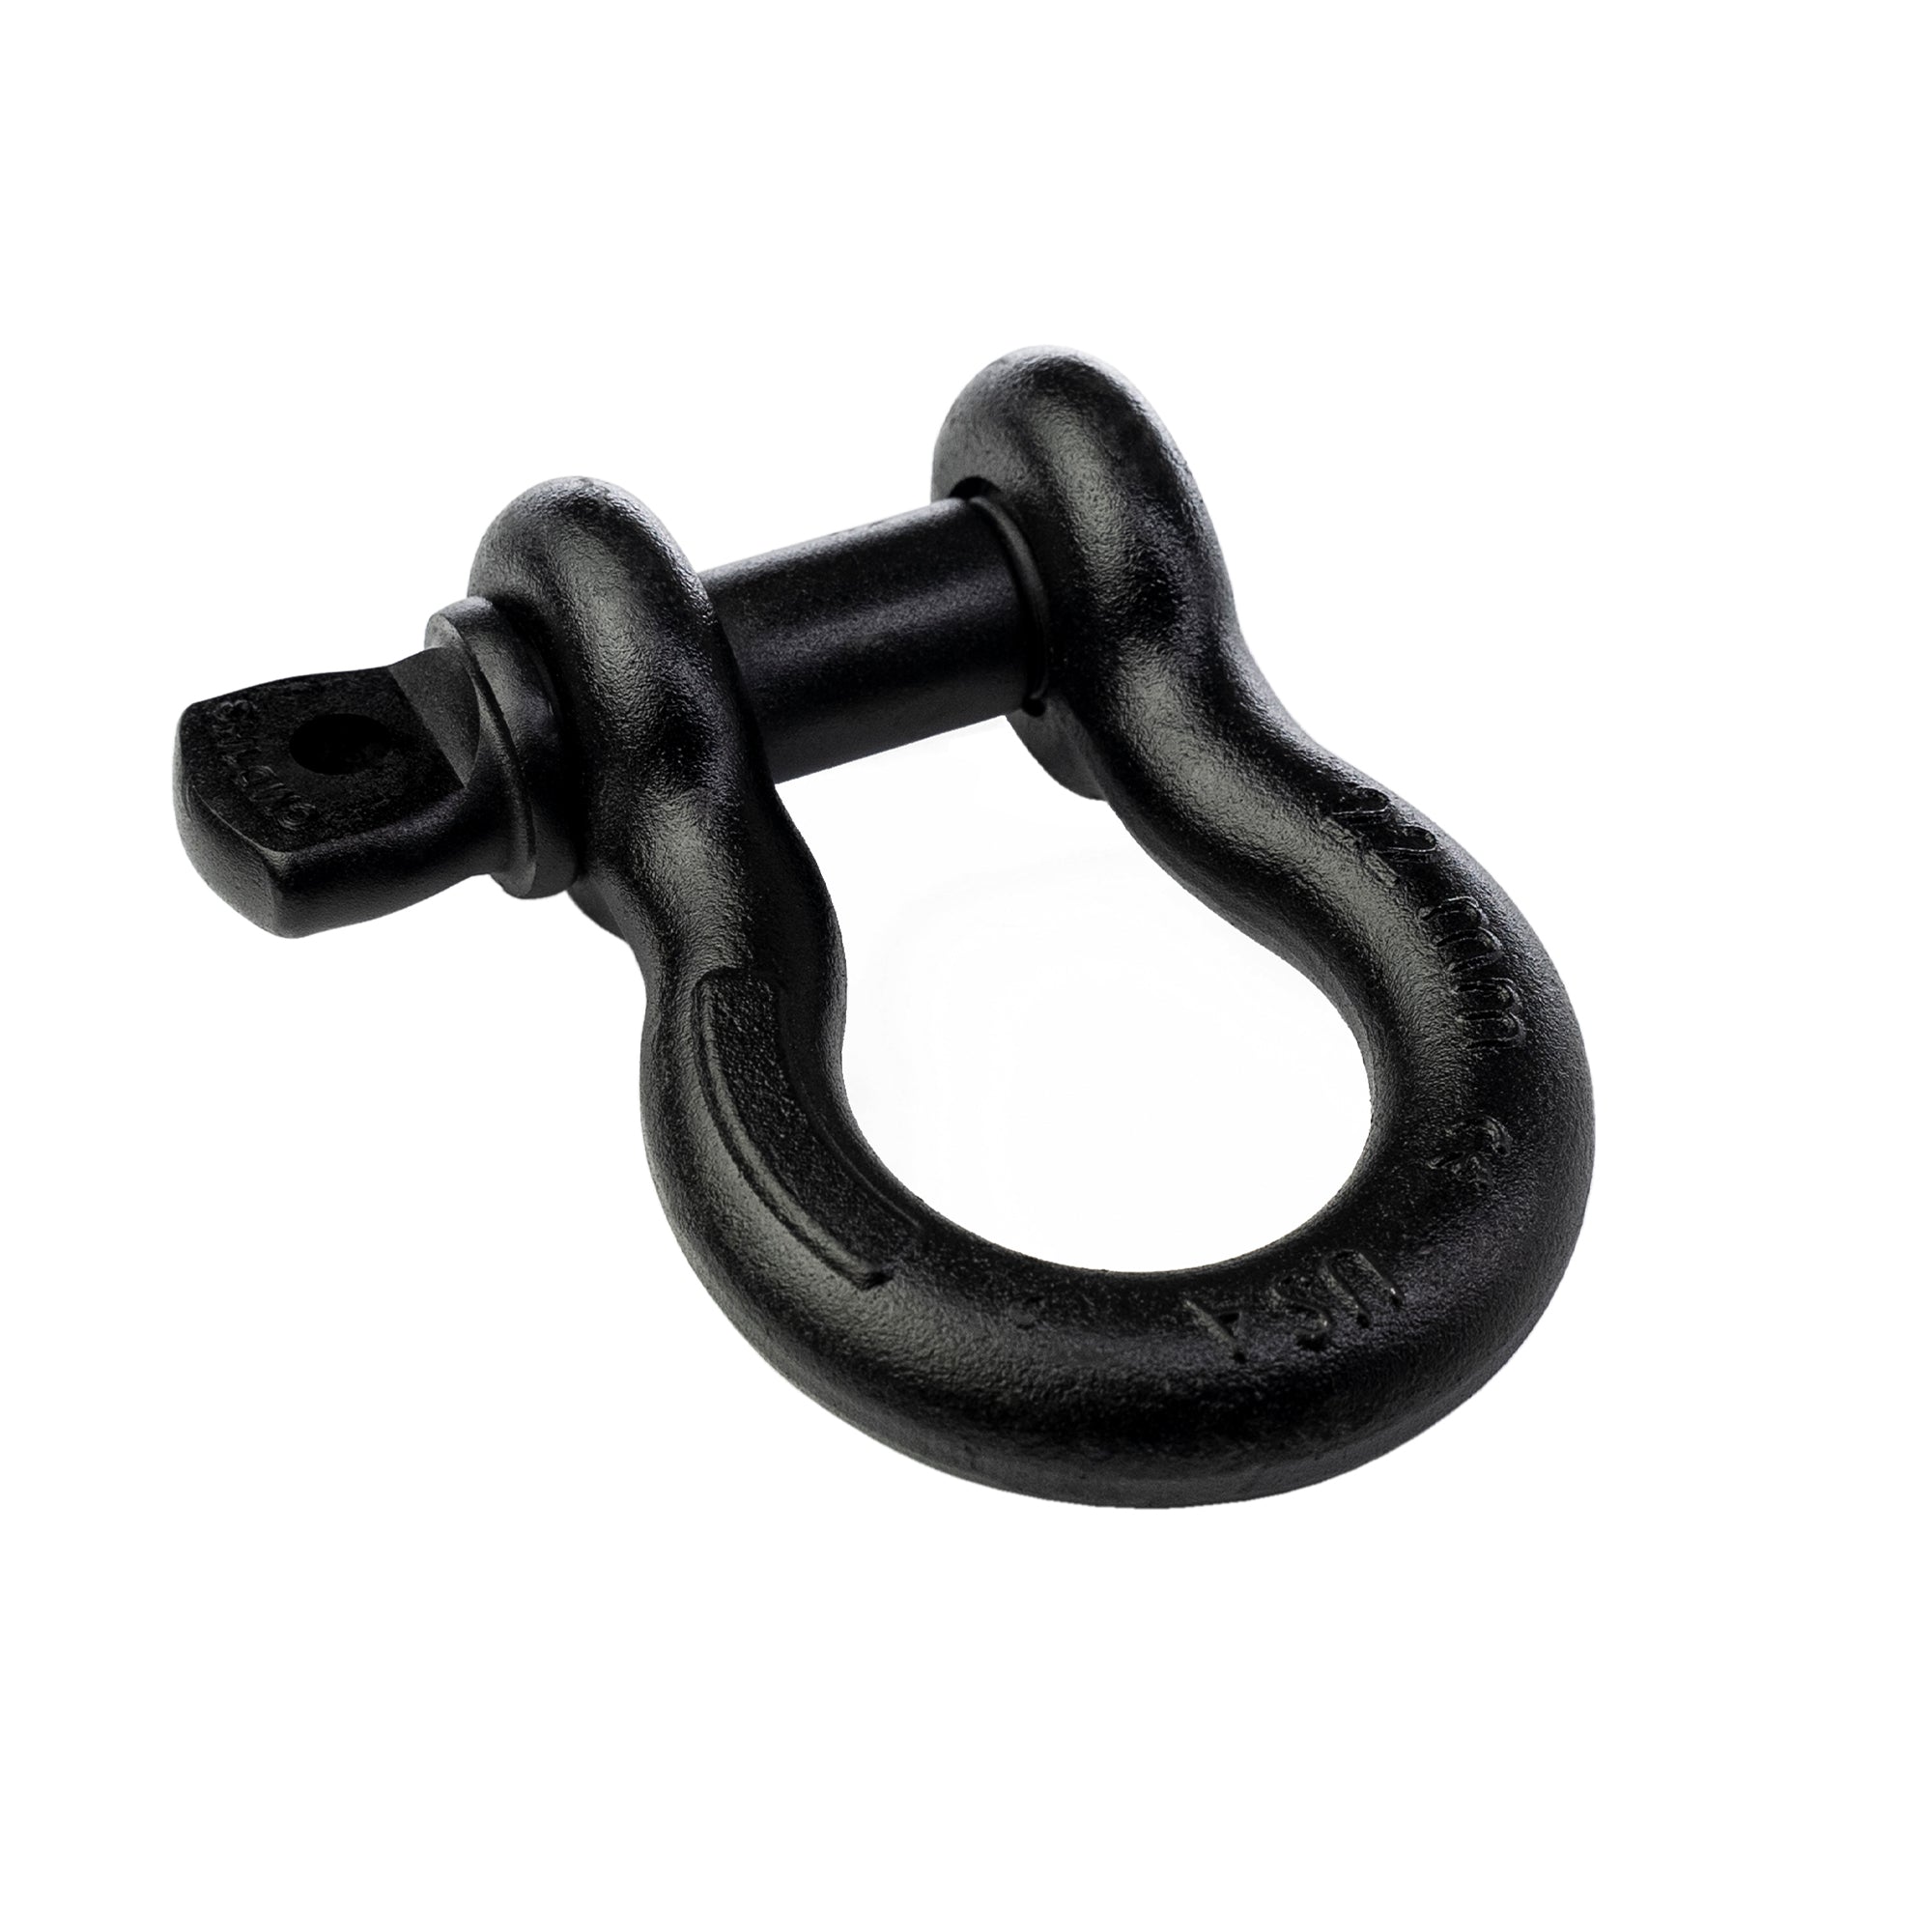 D-Ring 7/8"  8.5 ton, Domestic - For Use With 2.5" Shackle Block